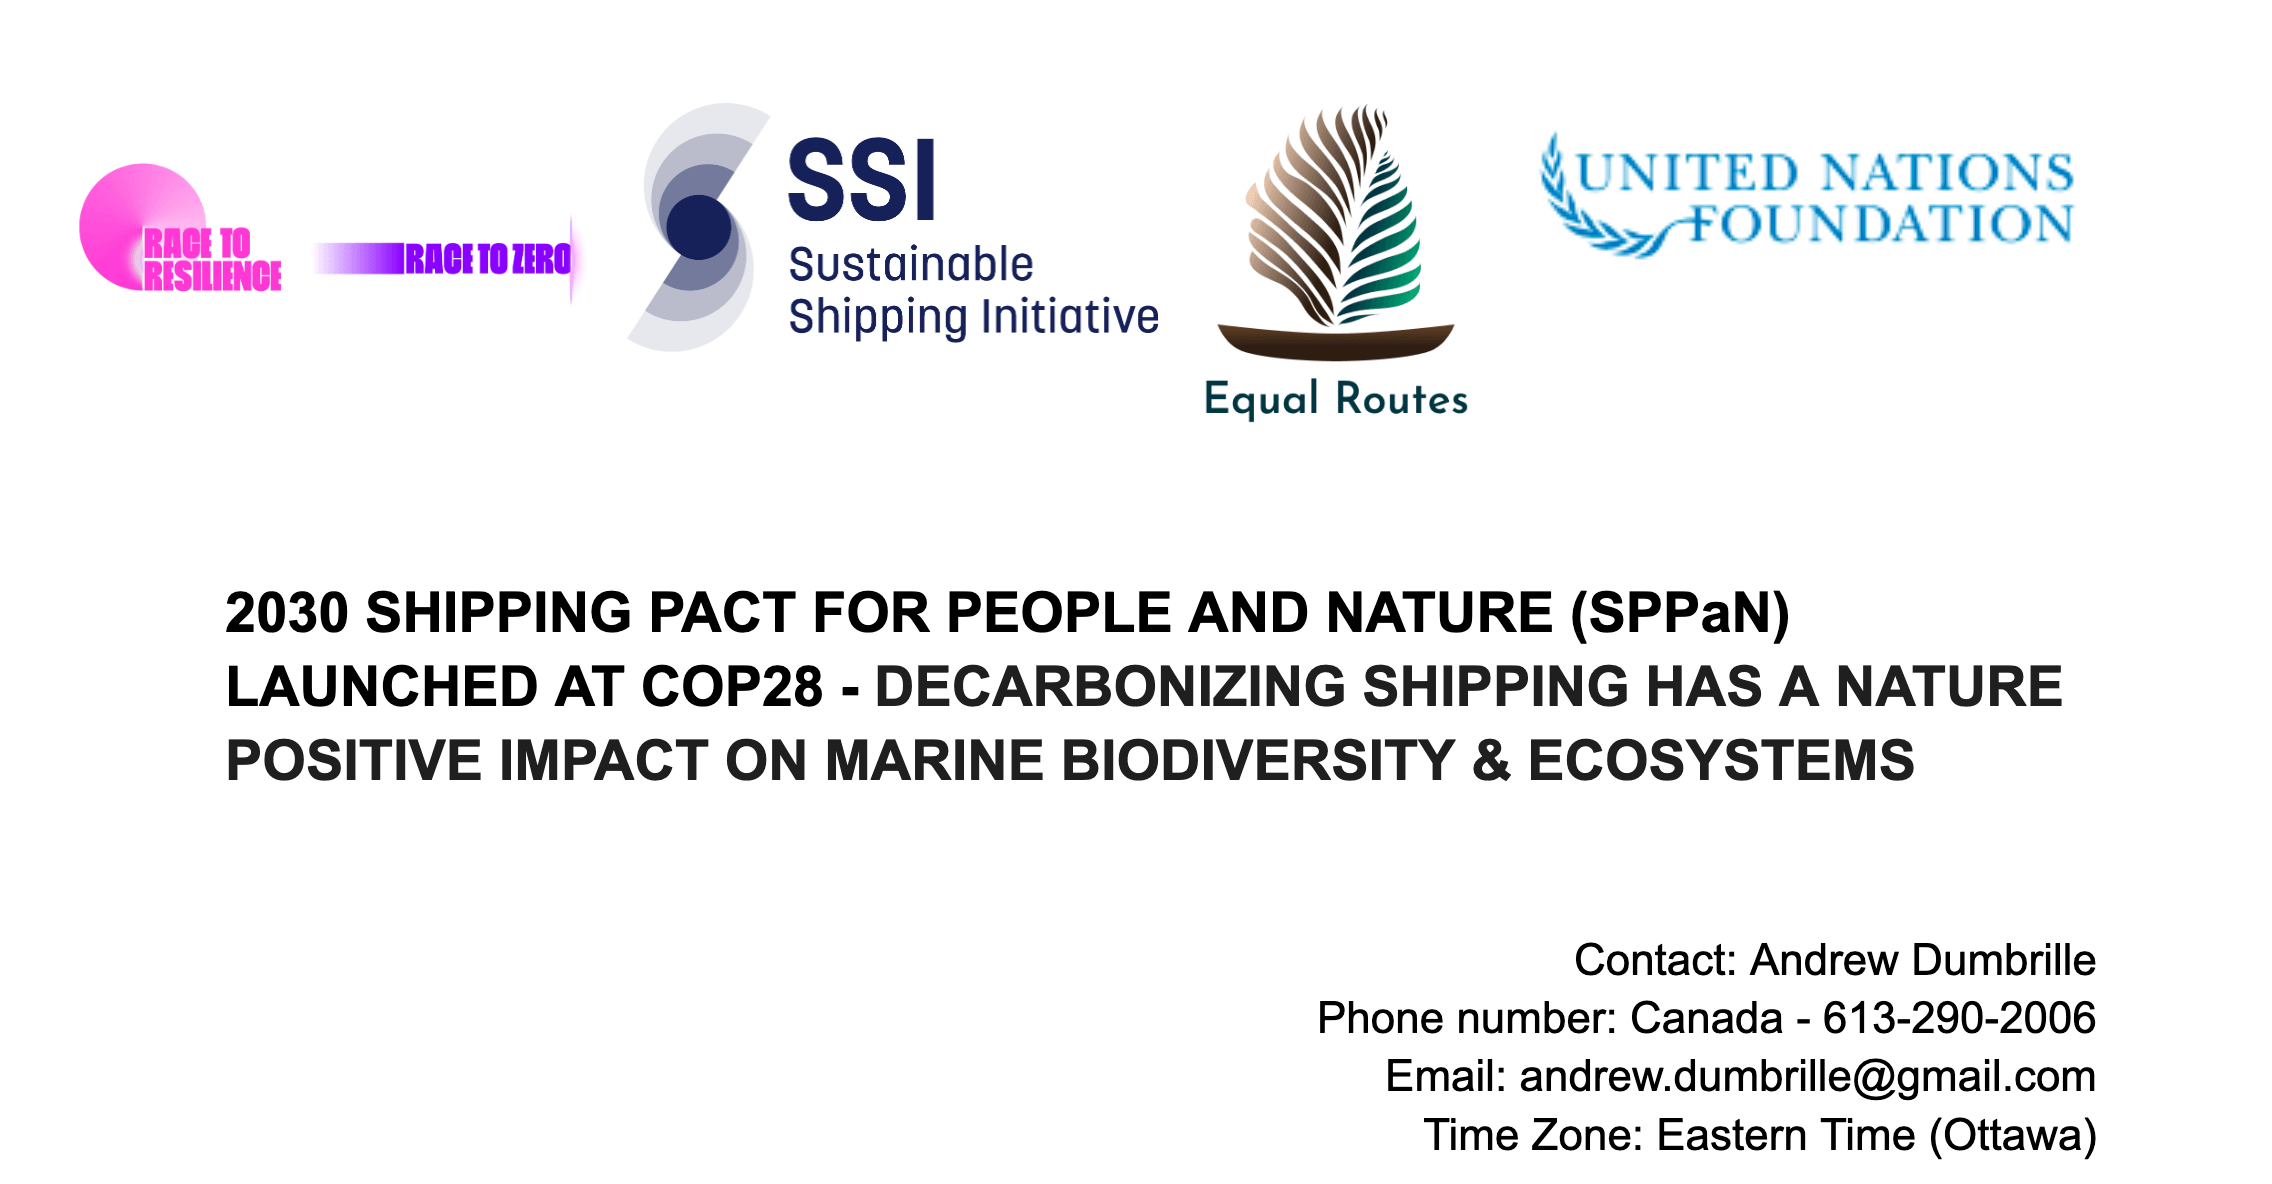 2030 SHIPPING PACT FOR PEOPLE AND NATURE (SPPaN) LAUNCHED AT COP28 - DECARBONIZING SHIPPING HAS A NATURE POSITIVE IMPACT ON MARINE BIODIVERSITY & ECOSYSTEMS